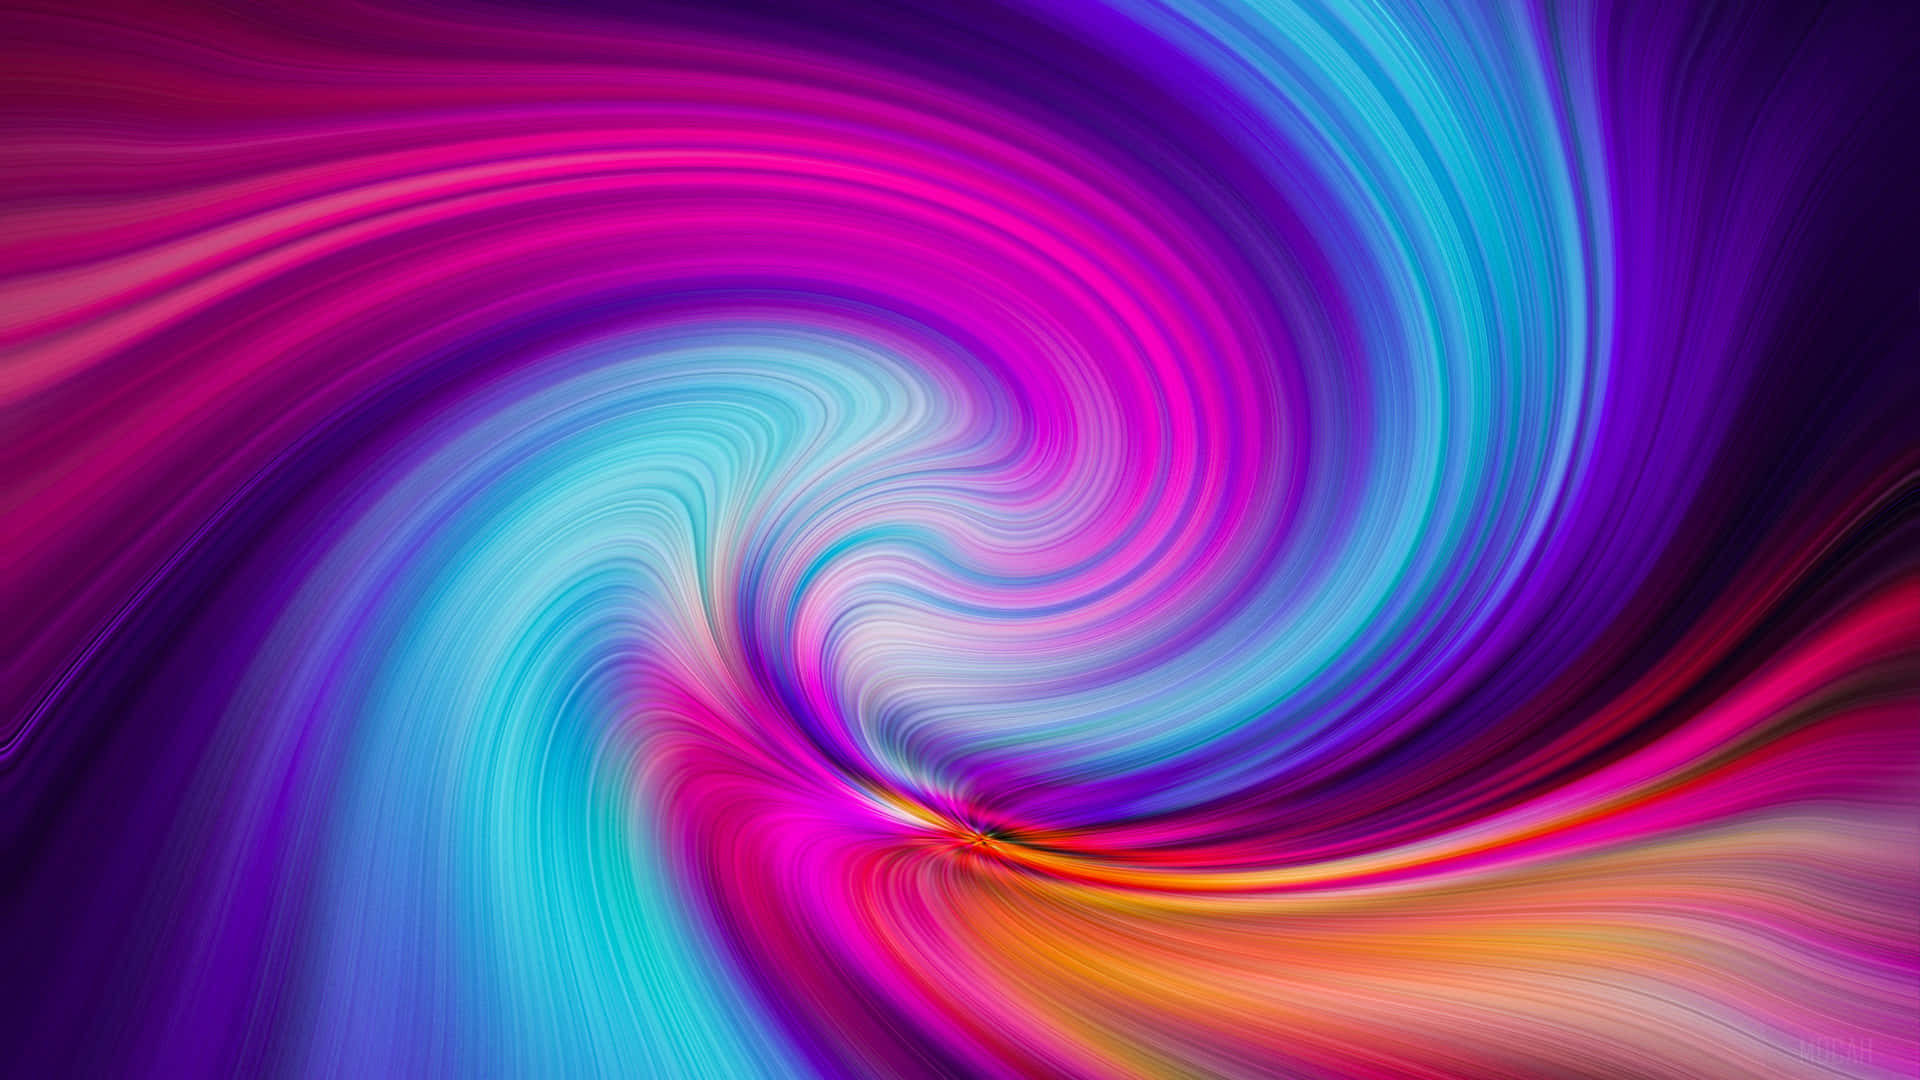 3d abstract swirl background wallpaper Royalty Free Vector